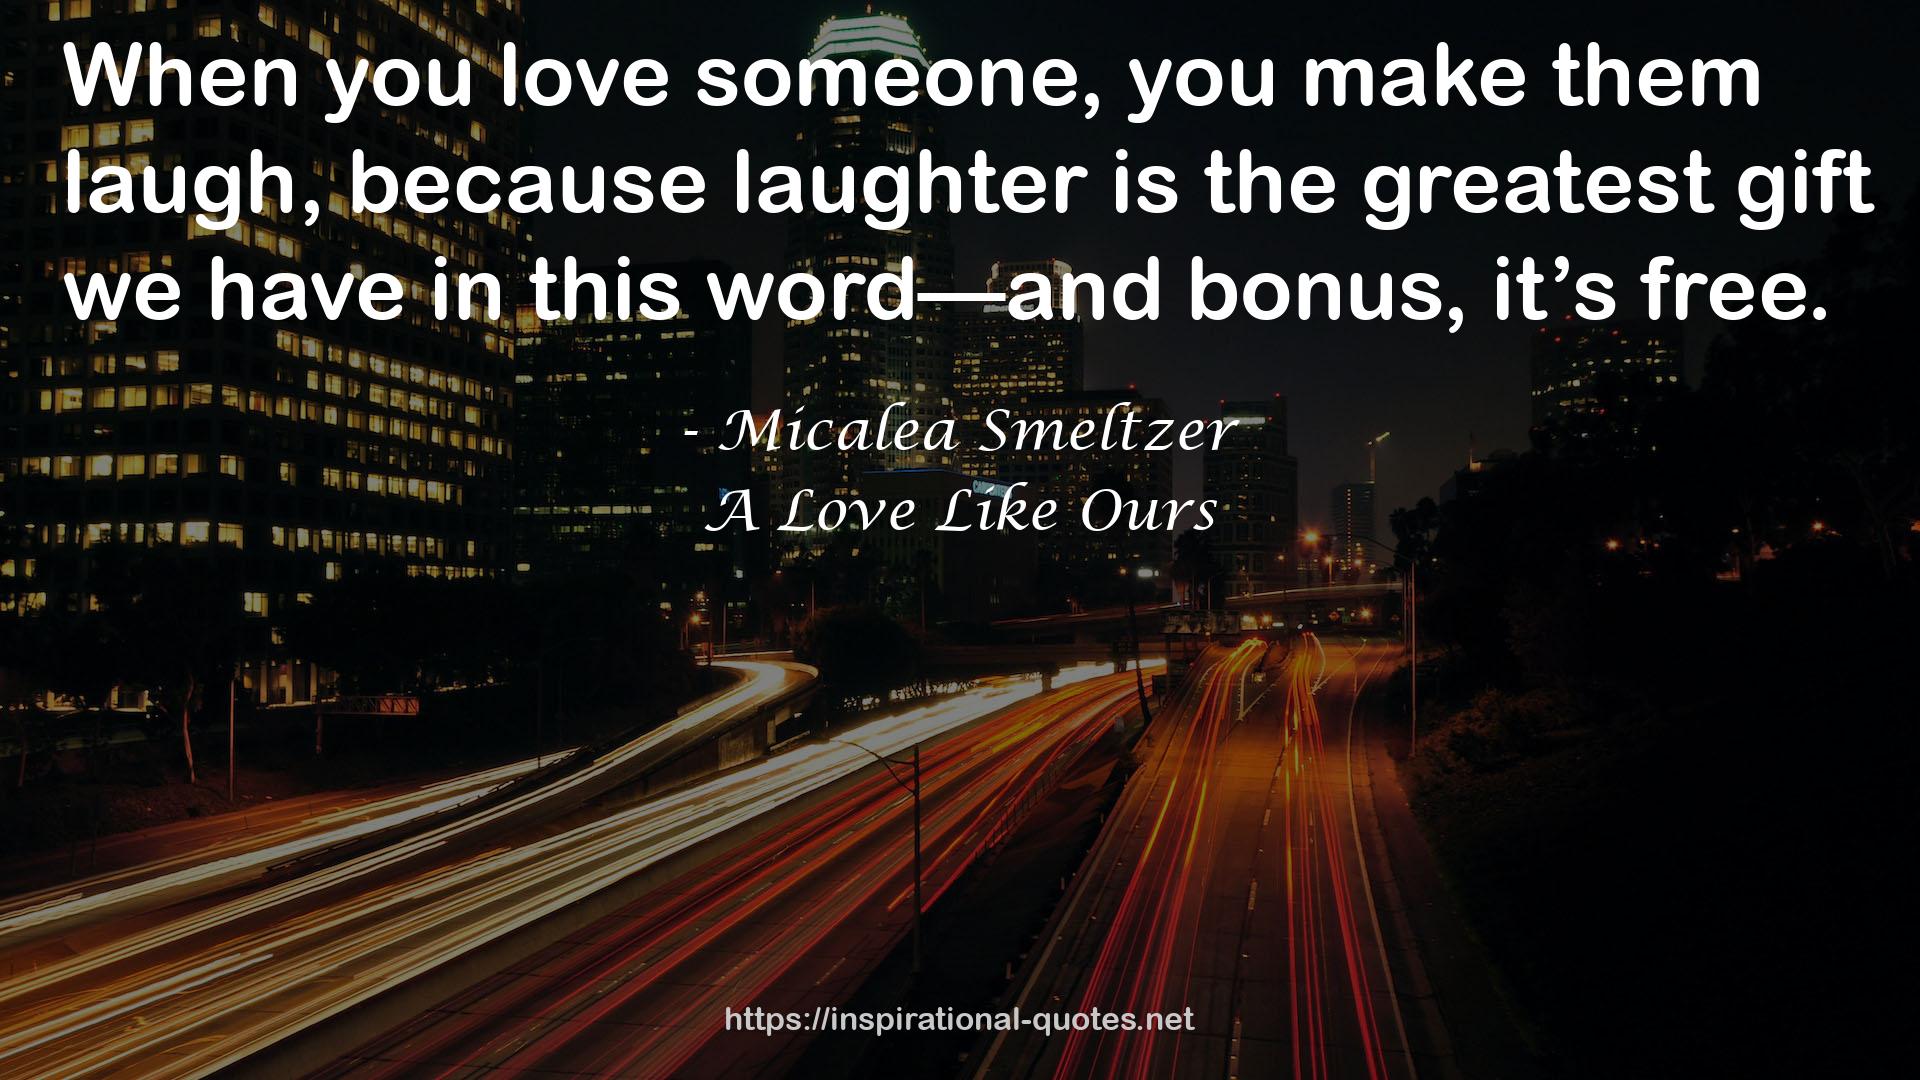 A Love Like Ours QUOTES